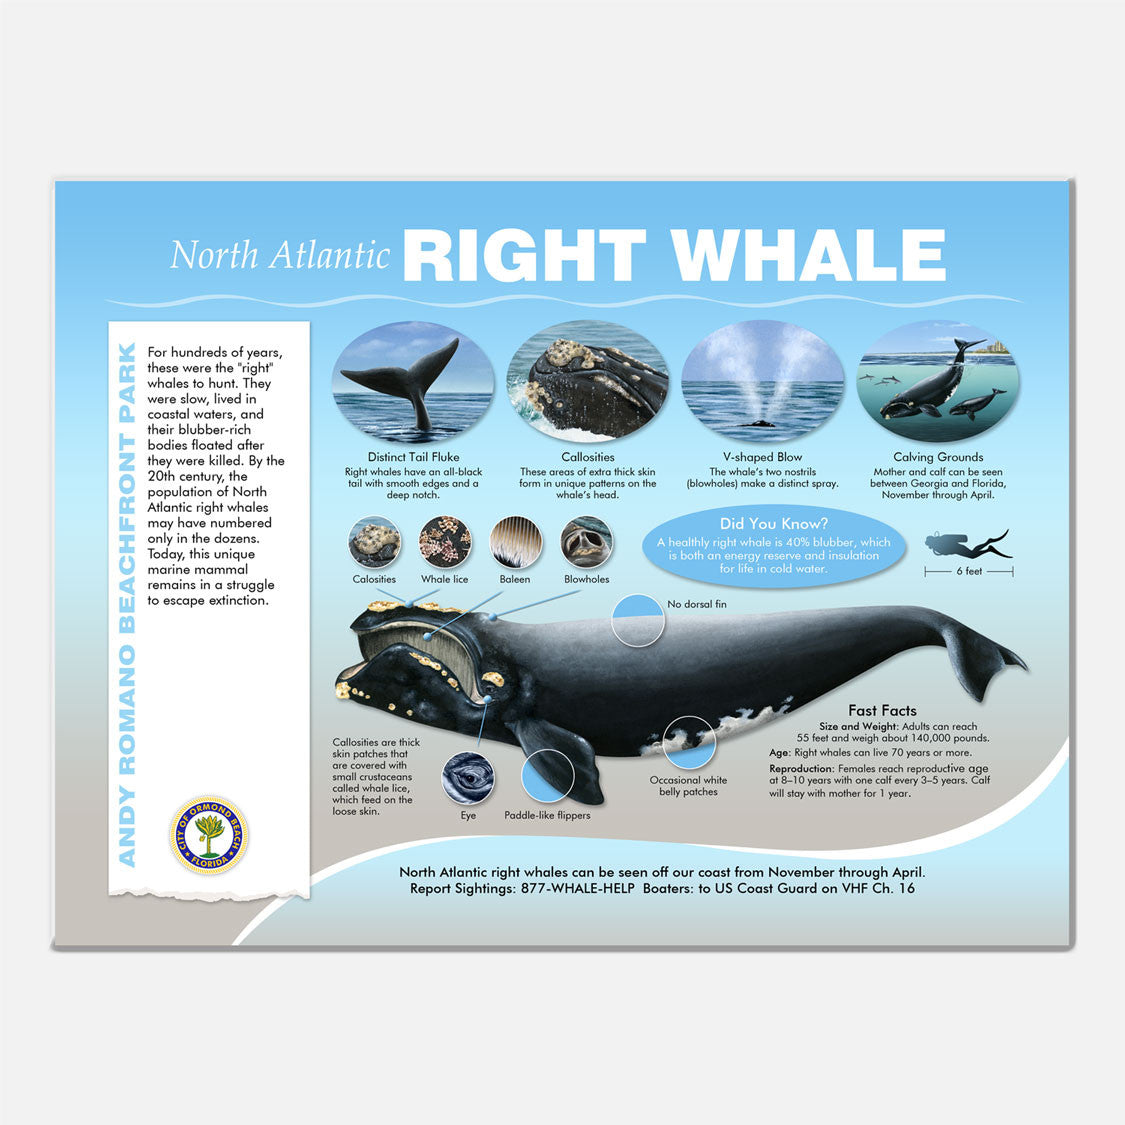 This beautifully illustrated educational display describes and identifies the right whales that may be seen from Andy Romano Beachfront Park, Ormond Beach, Florida.